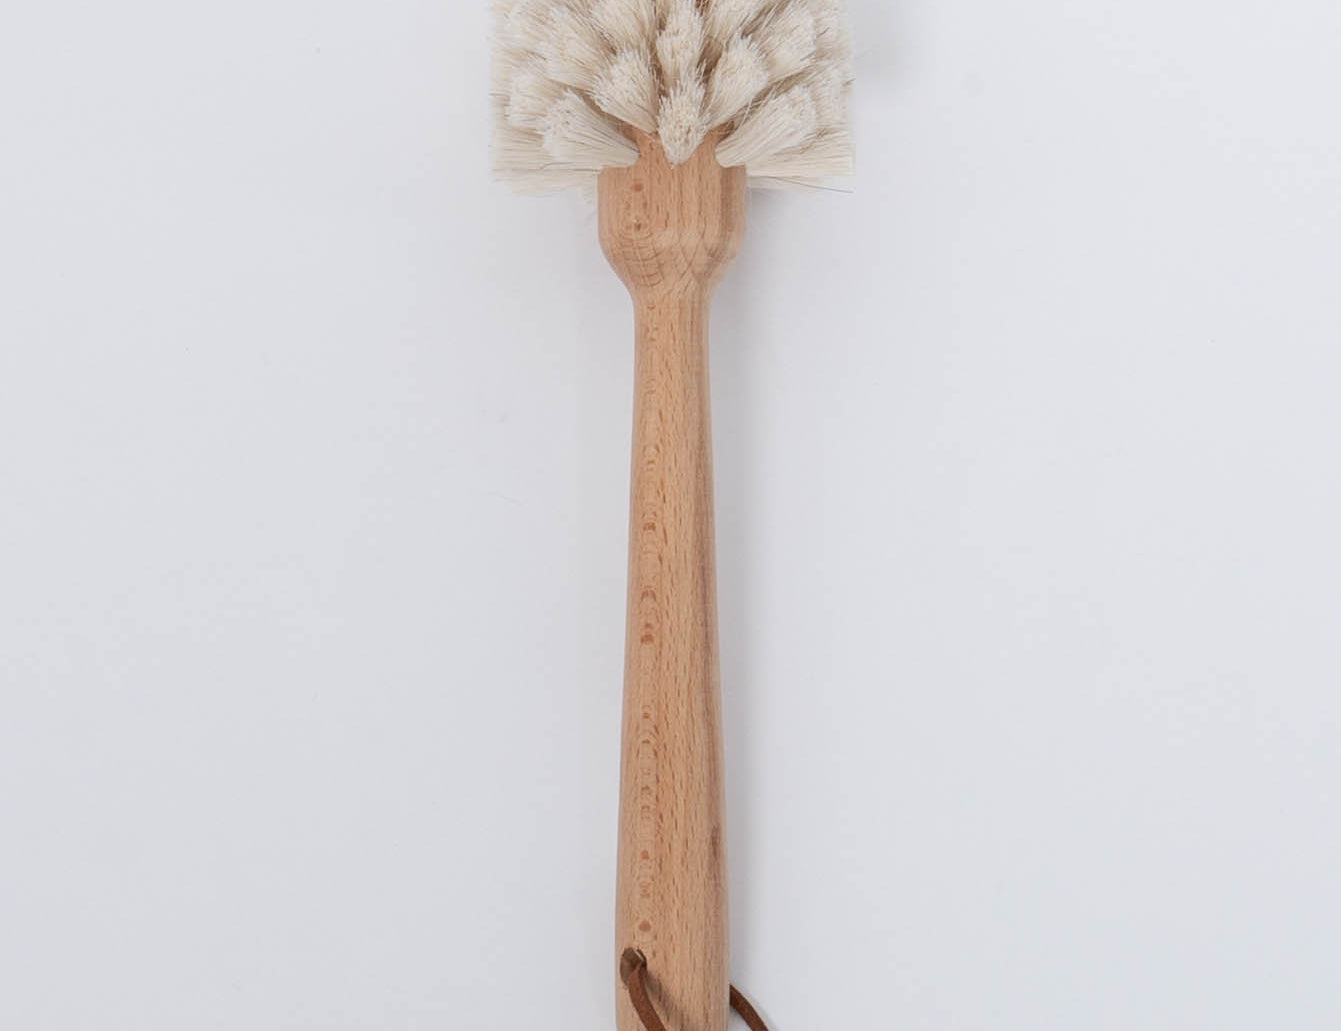 White bristle Beech Wood Dish Brush with Leather Strap by Creative Co-Op.